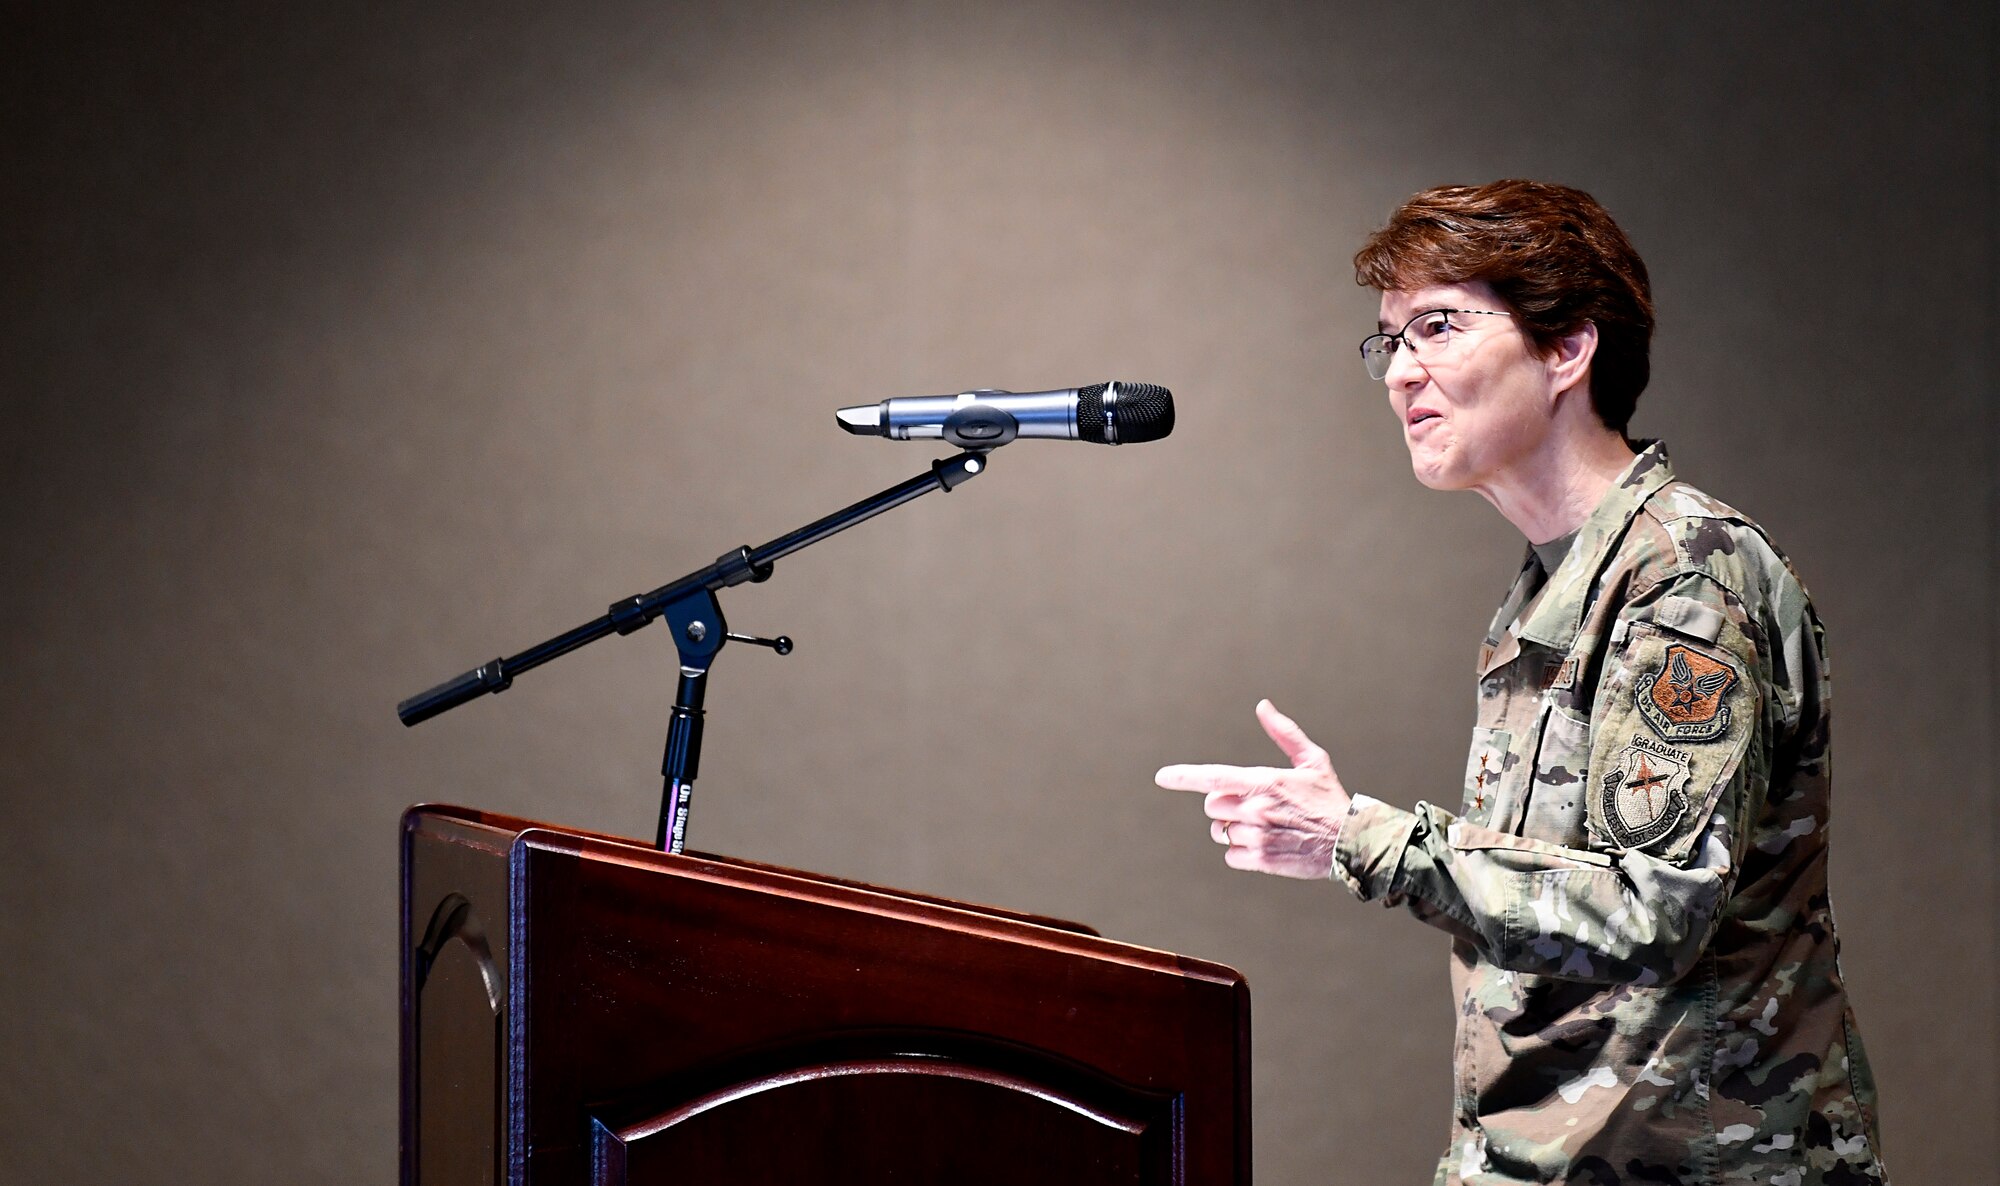 Lt. Gen. Jacqueline Van Ovost, Director of Staff, Headquarters Air Force, provides remarks during the inaugural Air Force Materiel Command Women's Leadership Symposium, Nov. 13-14. The two-day event drew more than 250 attendees from across the command, with keynote speakers, issue-focused panels and collaborative networking discussions designed to empower women to help foster workplace environments that embrace diversity and promote leadership growth throughout the organization.